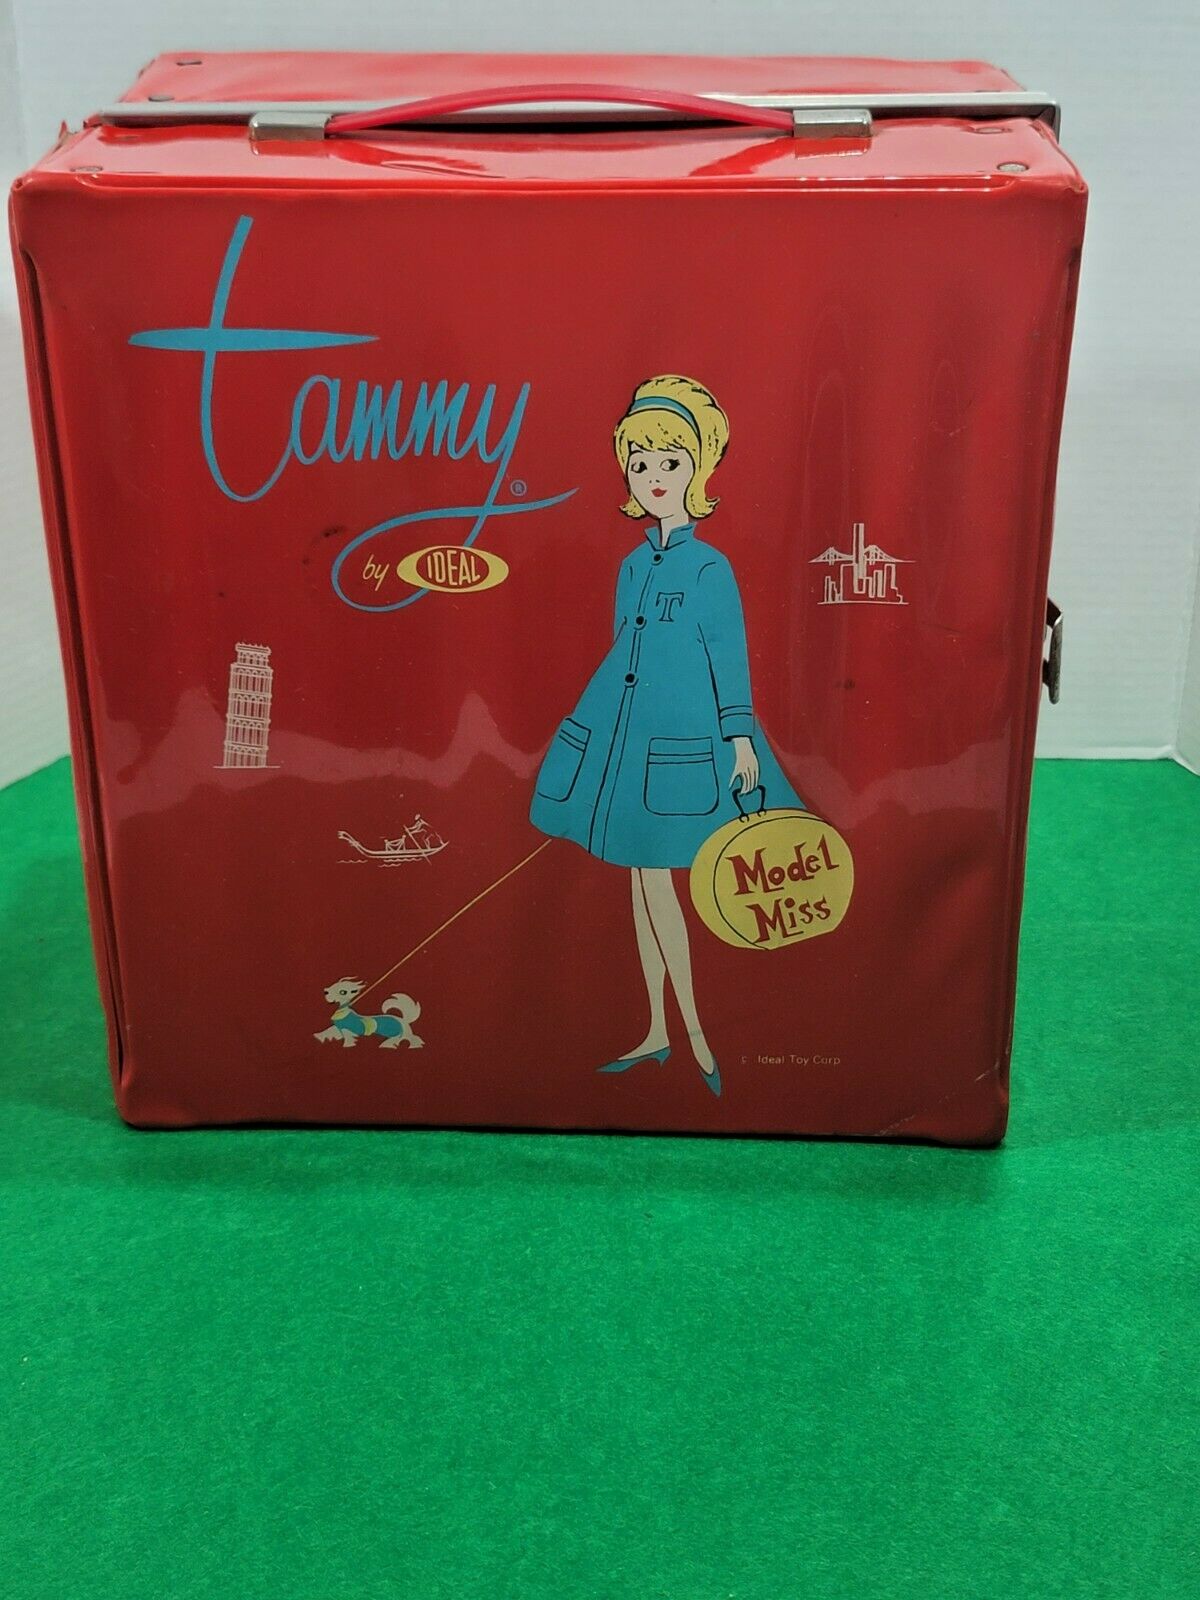 Vintage Tammy Doll Red Carrying Case Trunk Ideal Toy Corp 1960s Model Miss